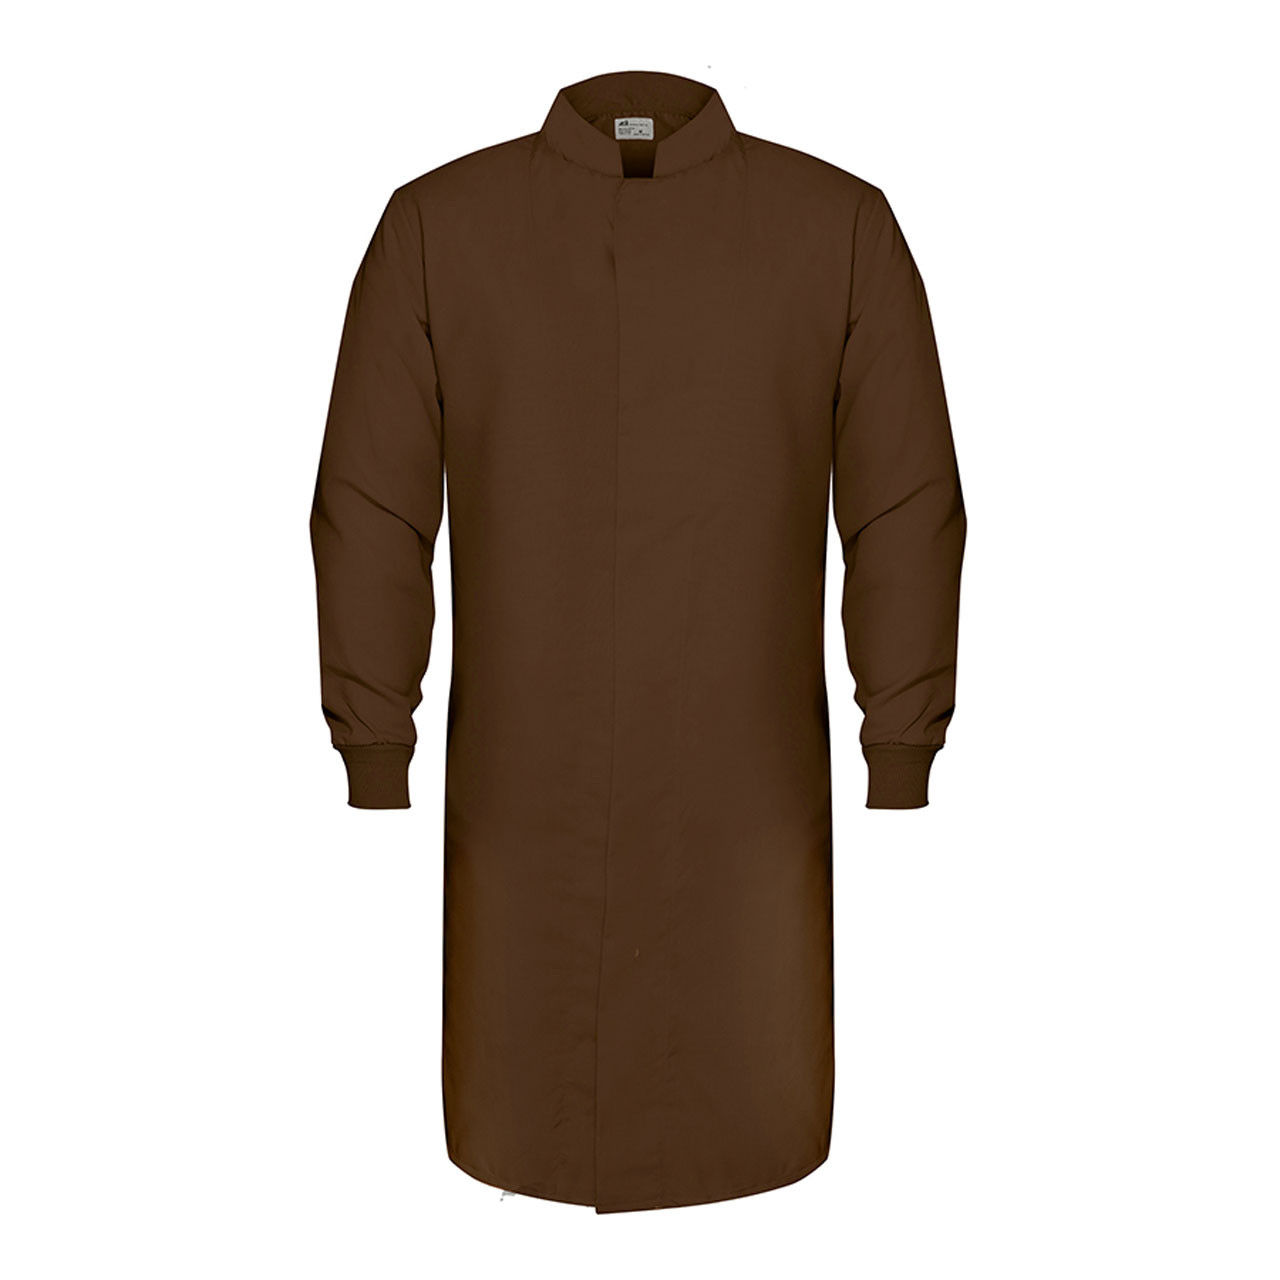 Does the brown lab coat have a button or zipper closure?